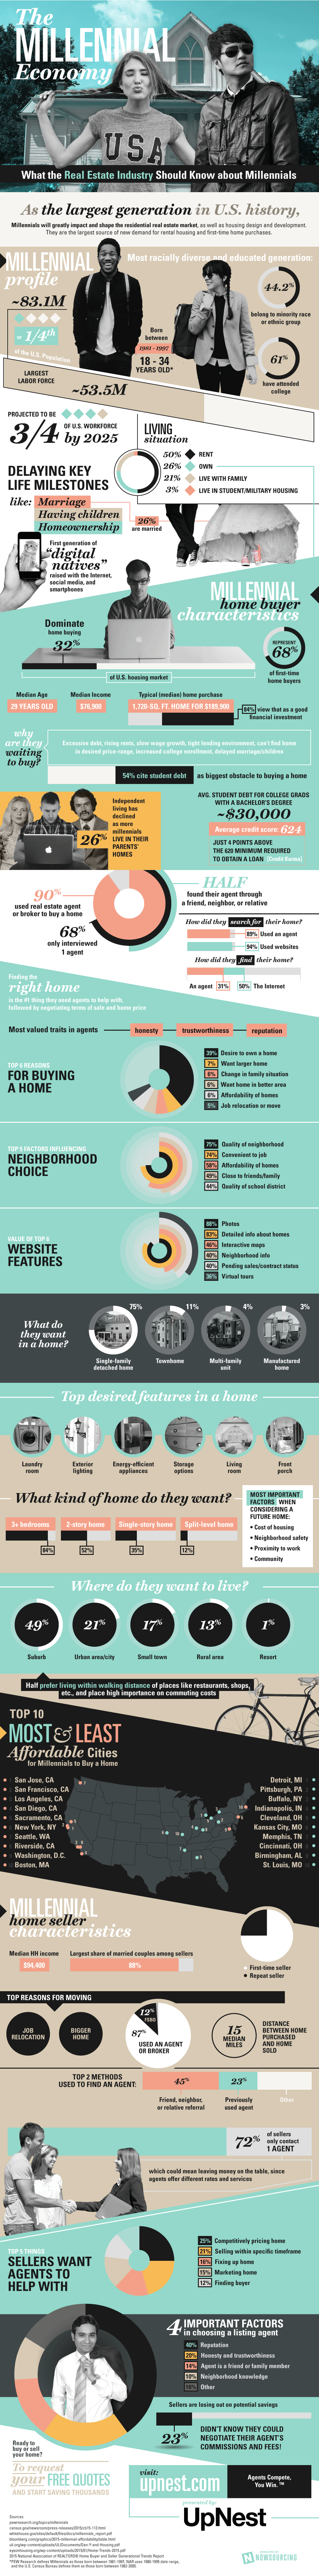 millenial economy real estate infographic